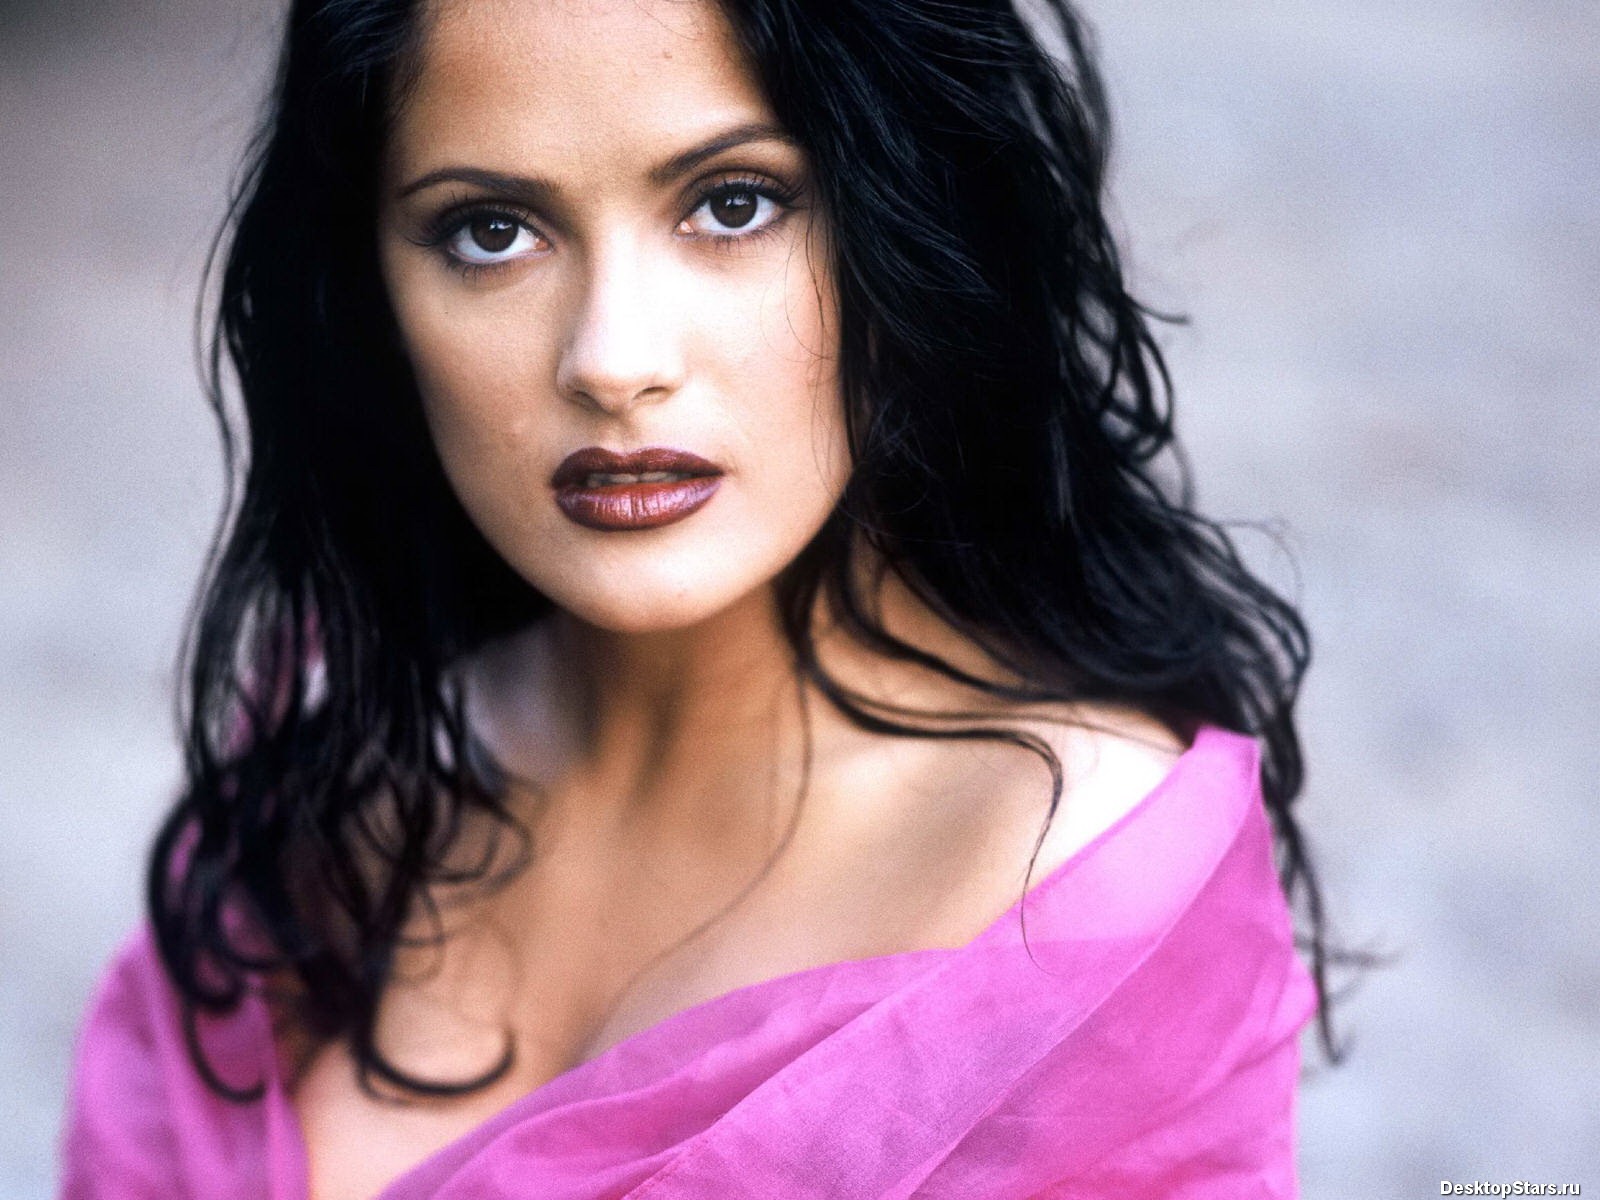 Salma Hayek #050 - 1600x1200 Wallpapers Pictures Photos Images